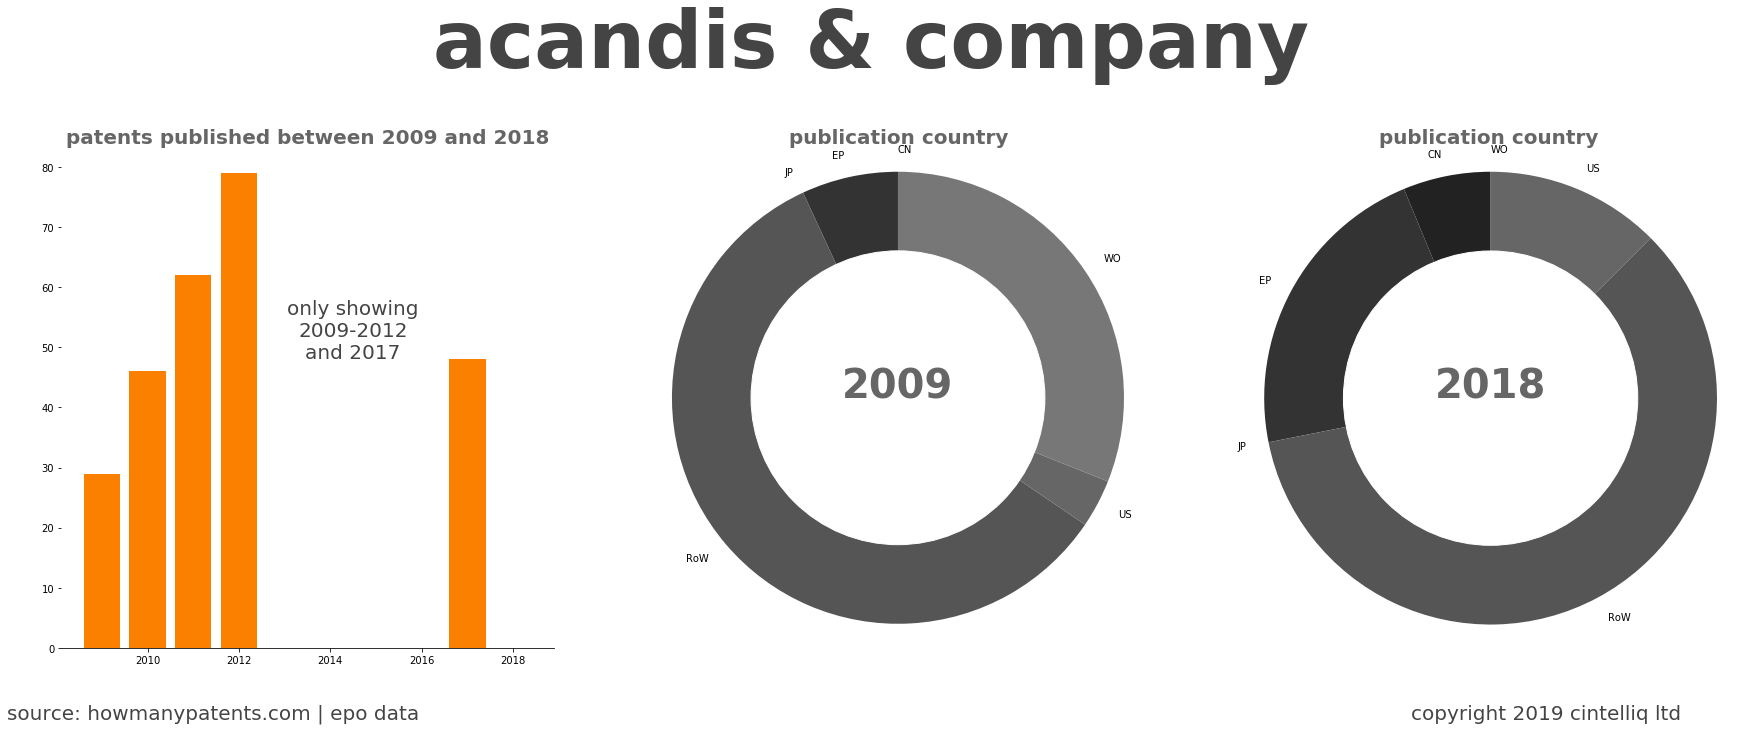 summary of patents for Acandis & Company